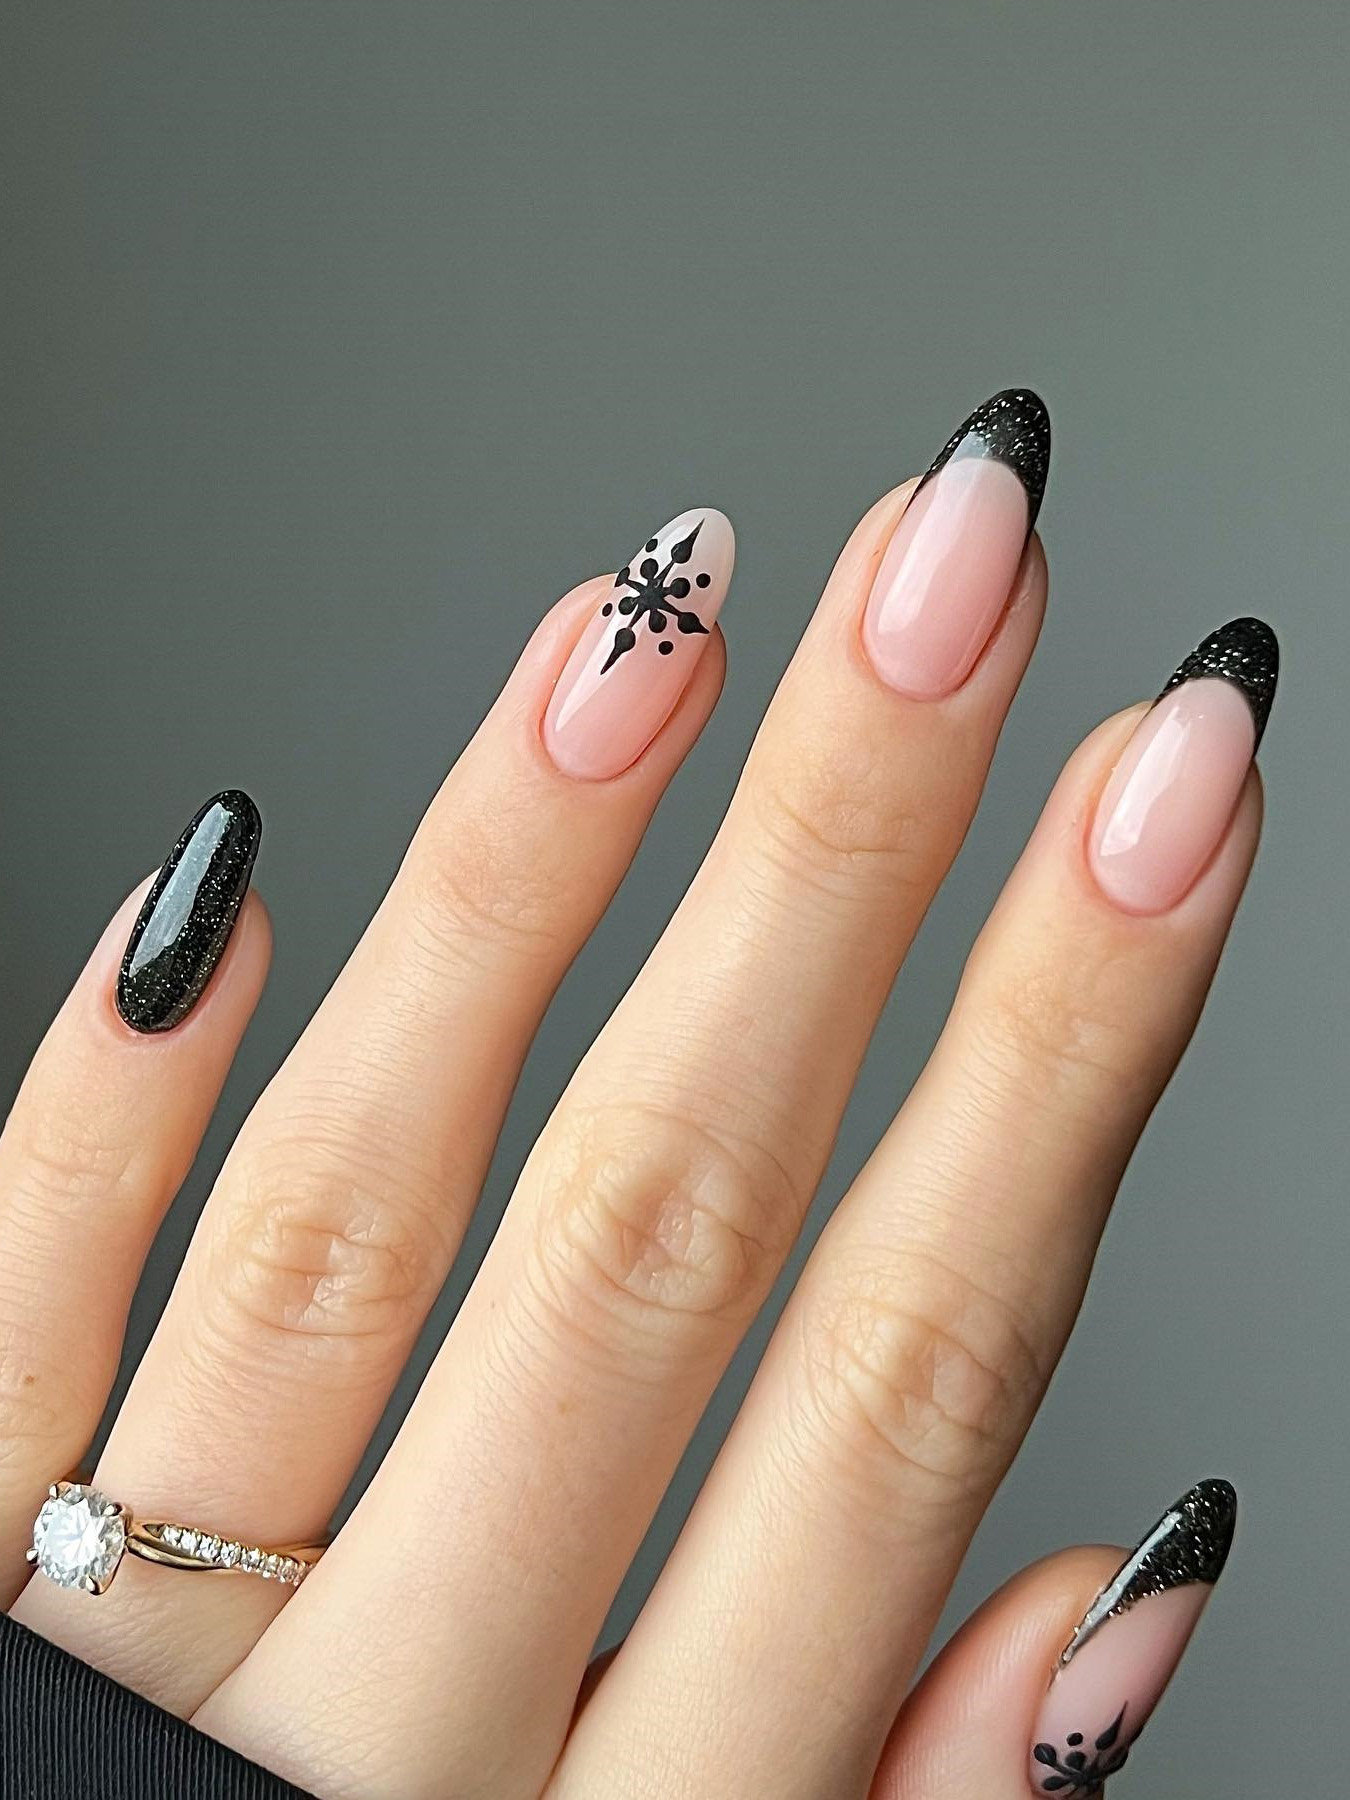 35 Best New Year's Nails Ideas and Designs to Try for 2023